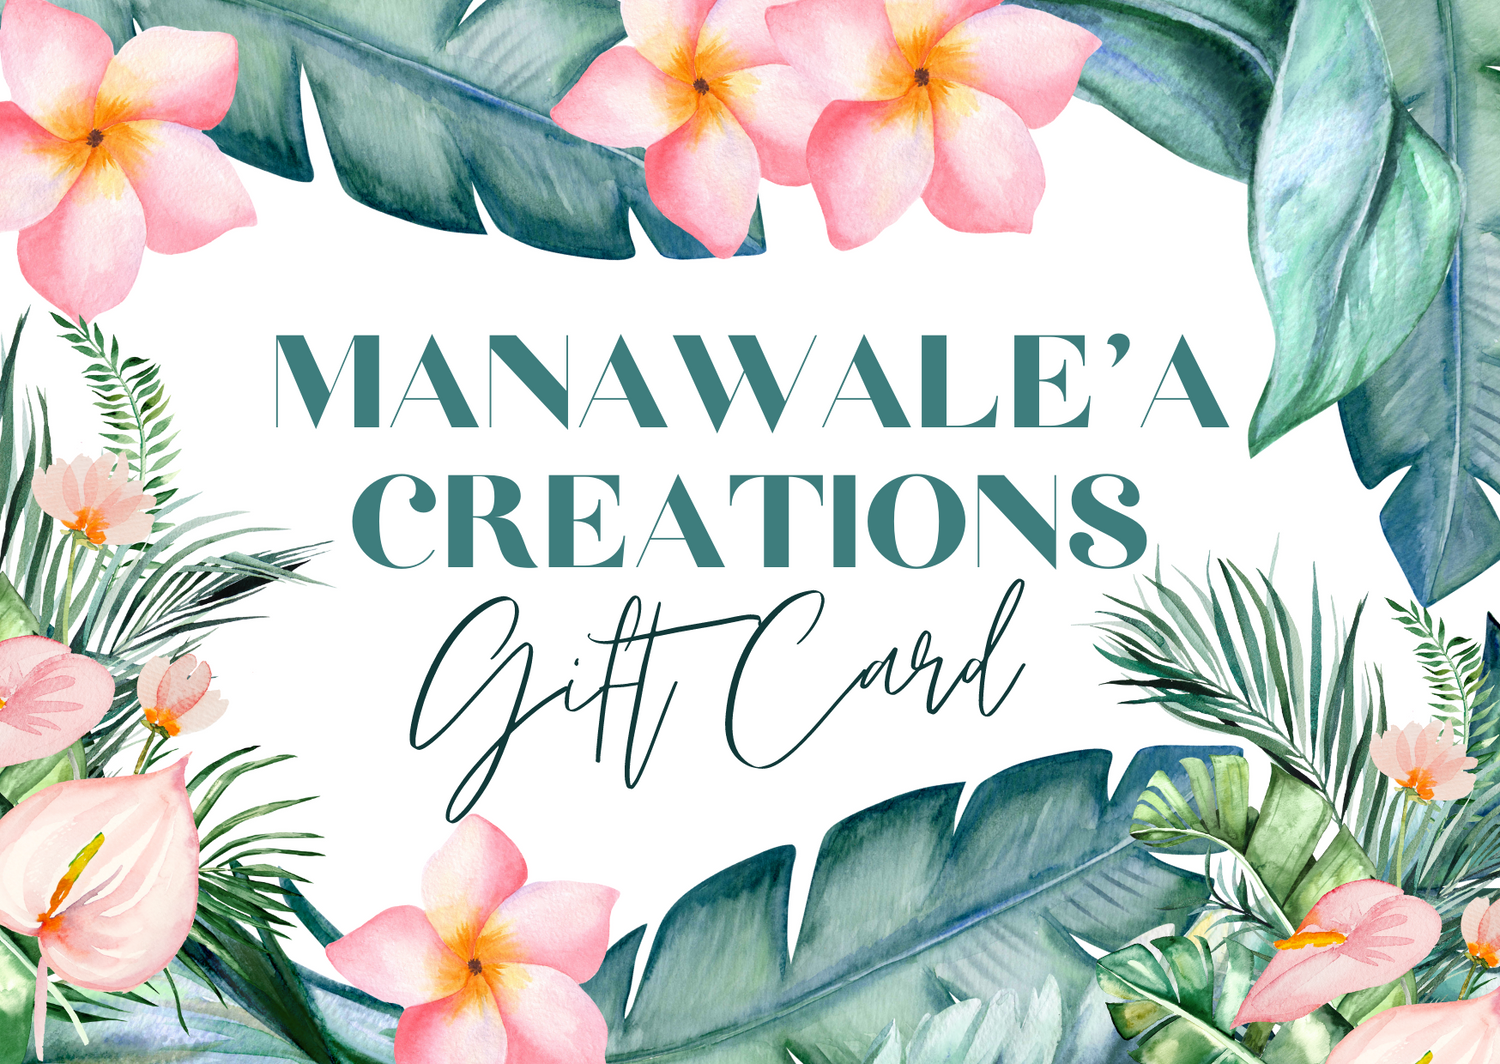 Manawale'a Creations Gift Cards